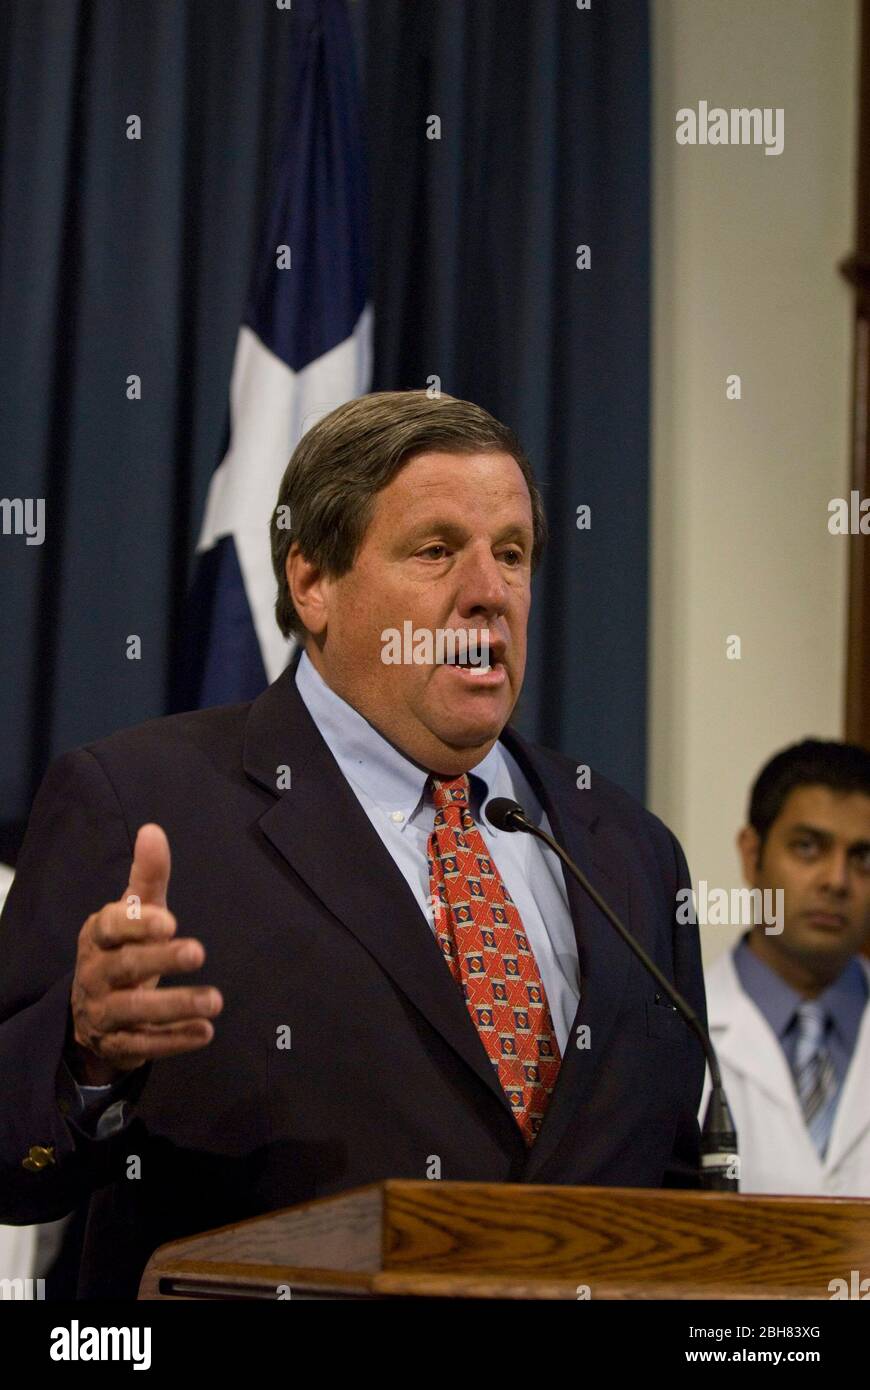 Austin , Texas - Texas Association of Business President and CEO Bill Hammond  at press conference announcing the findings of at Texas Public Policy Foundation studey about health care reform.©Marjorie Kamys Cotera / Daemmrich Photos Stock Photo